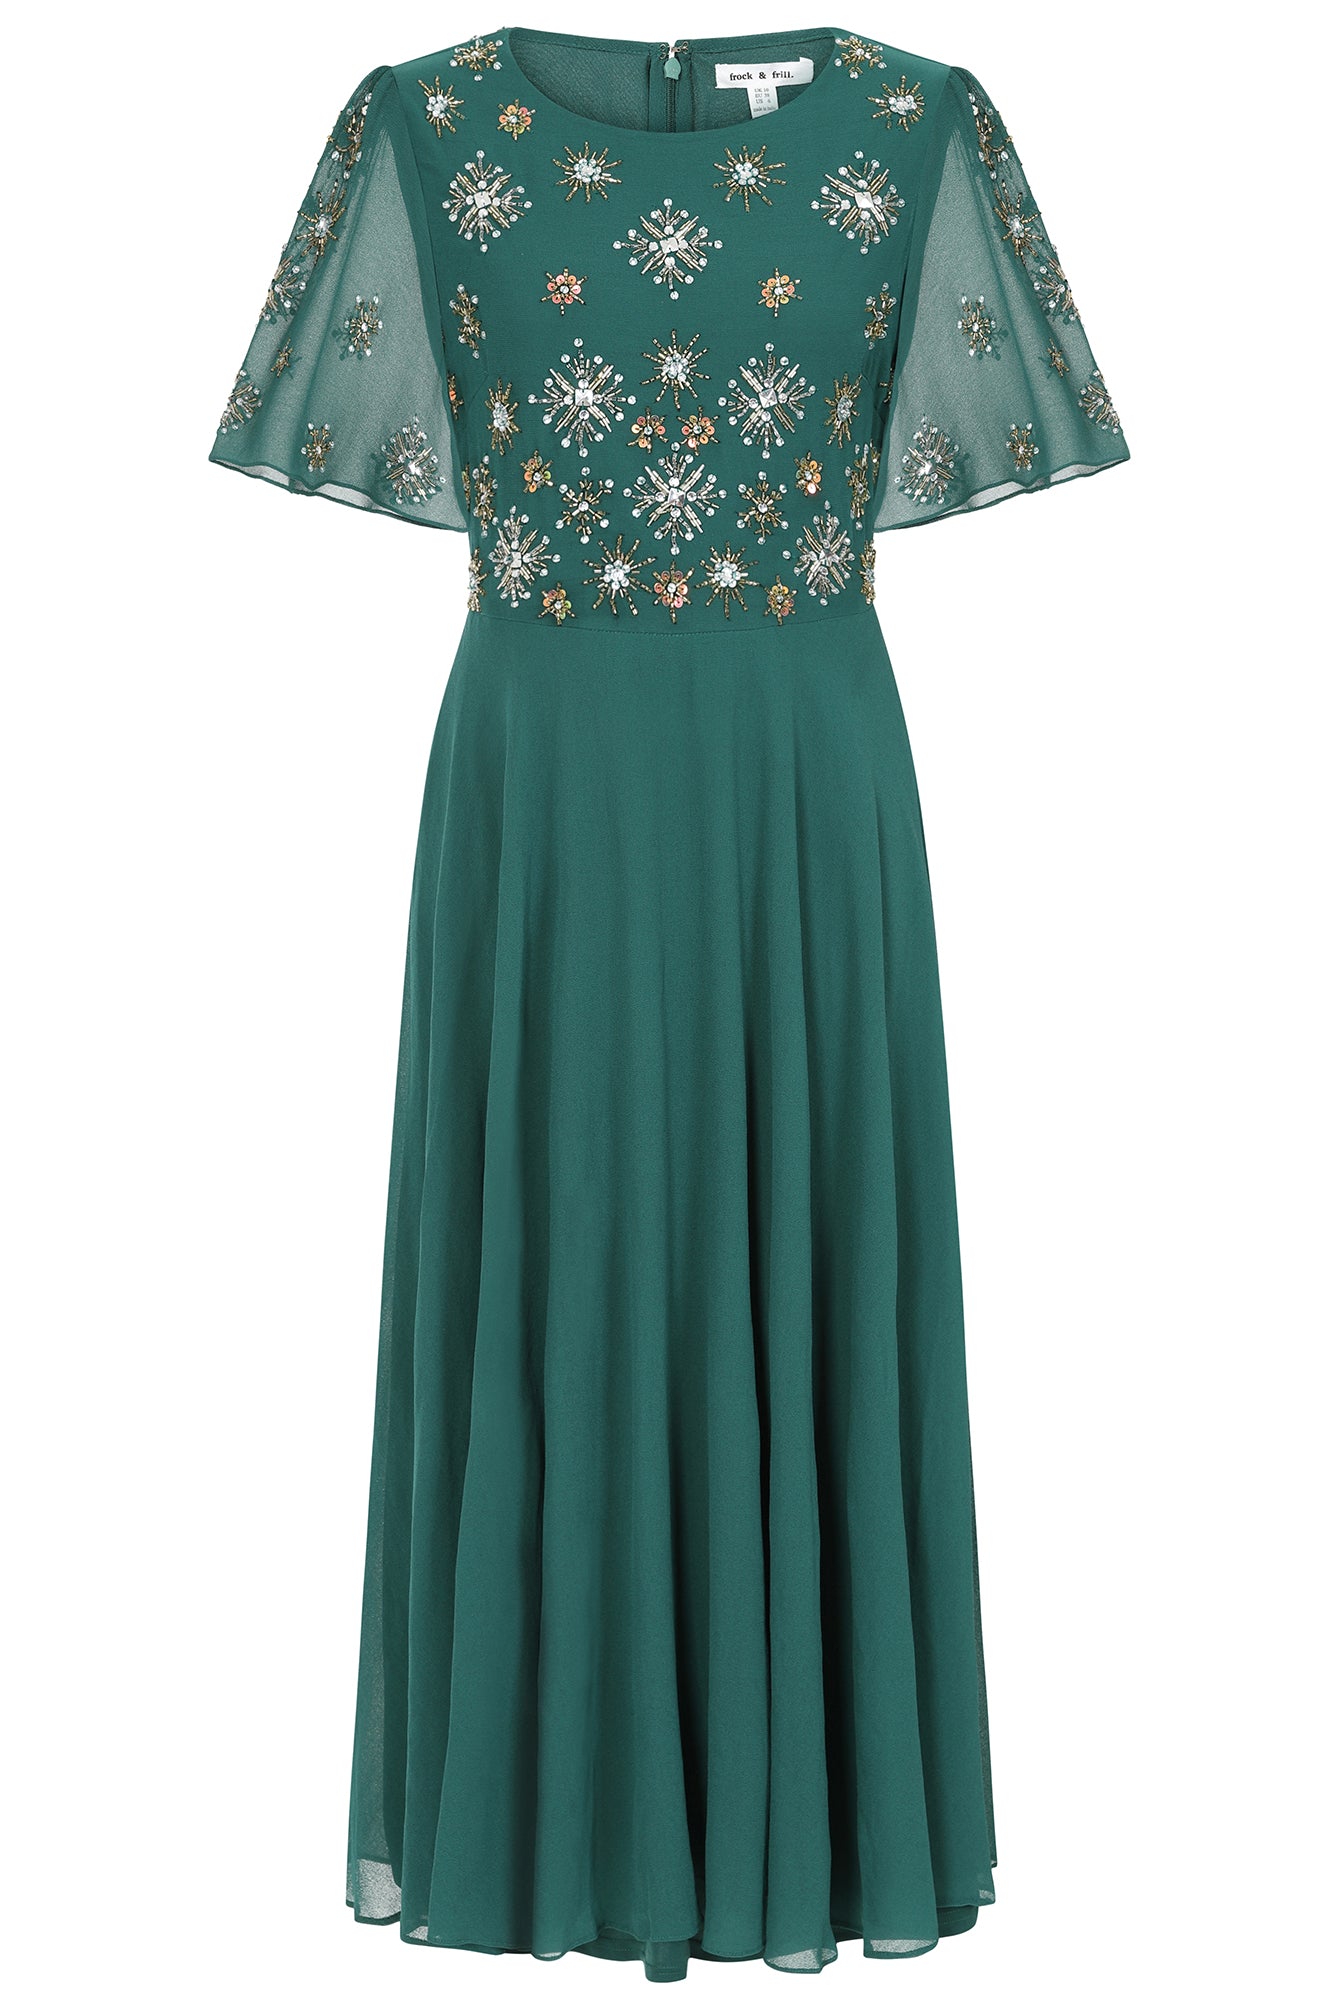 Women’s Kelby Embellished Midaxi Dress - Alpine Green Extra Small Frock and Frill